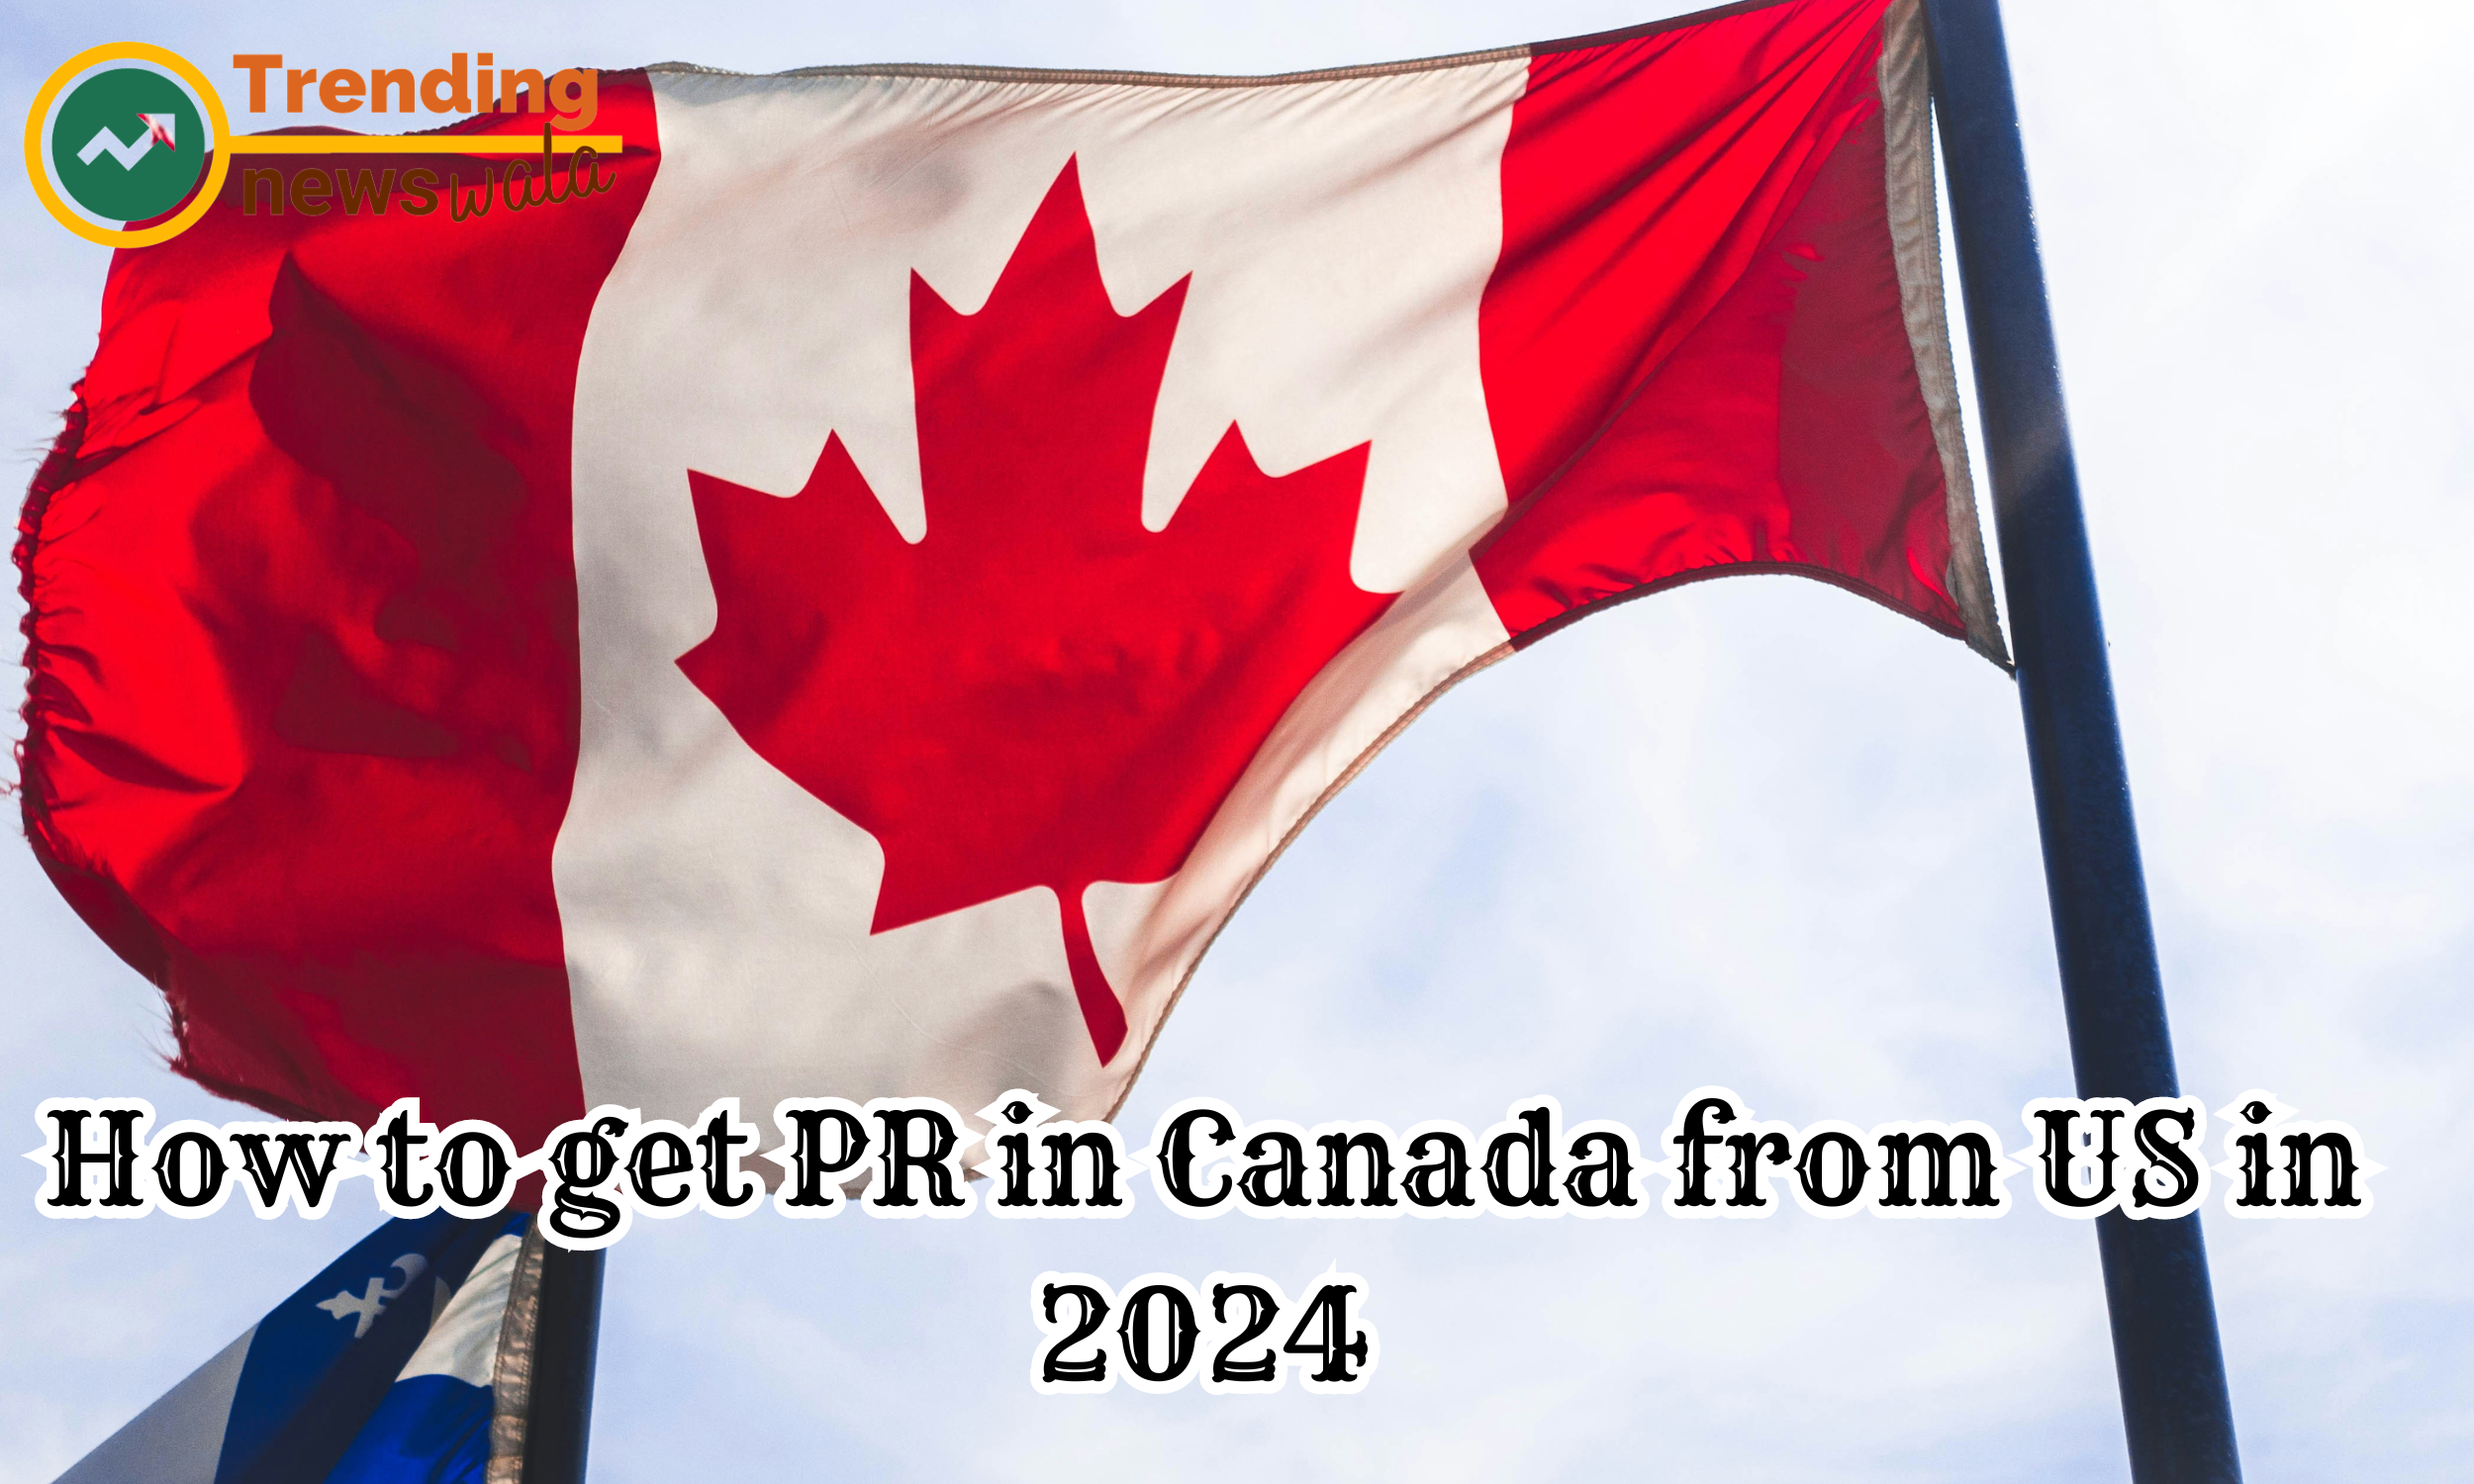 How to get PR in Canada from US in 2024